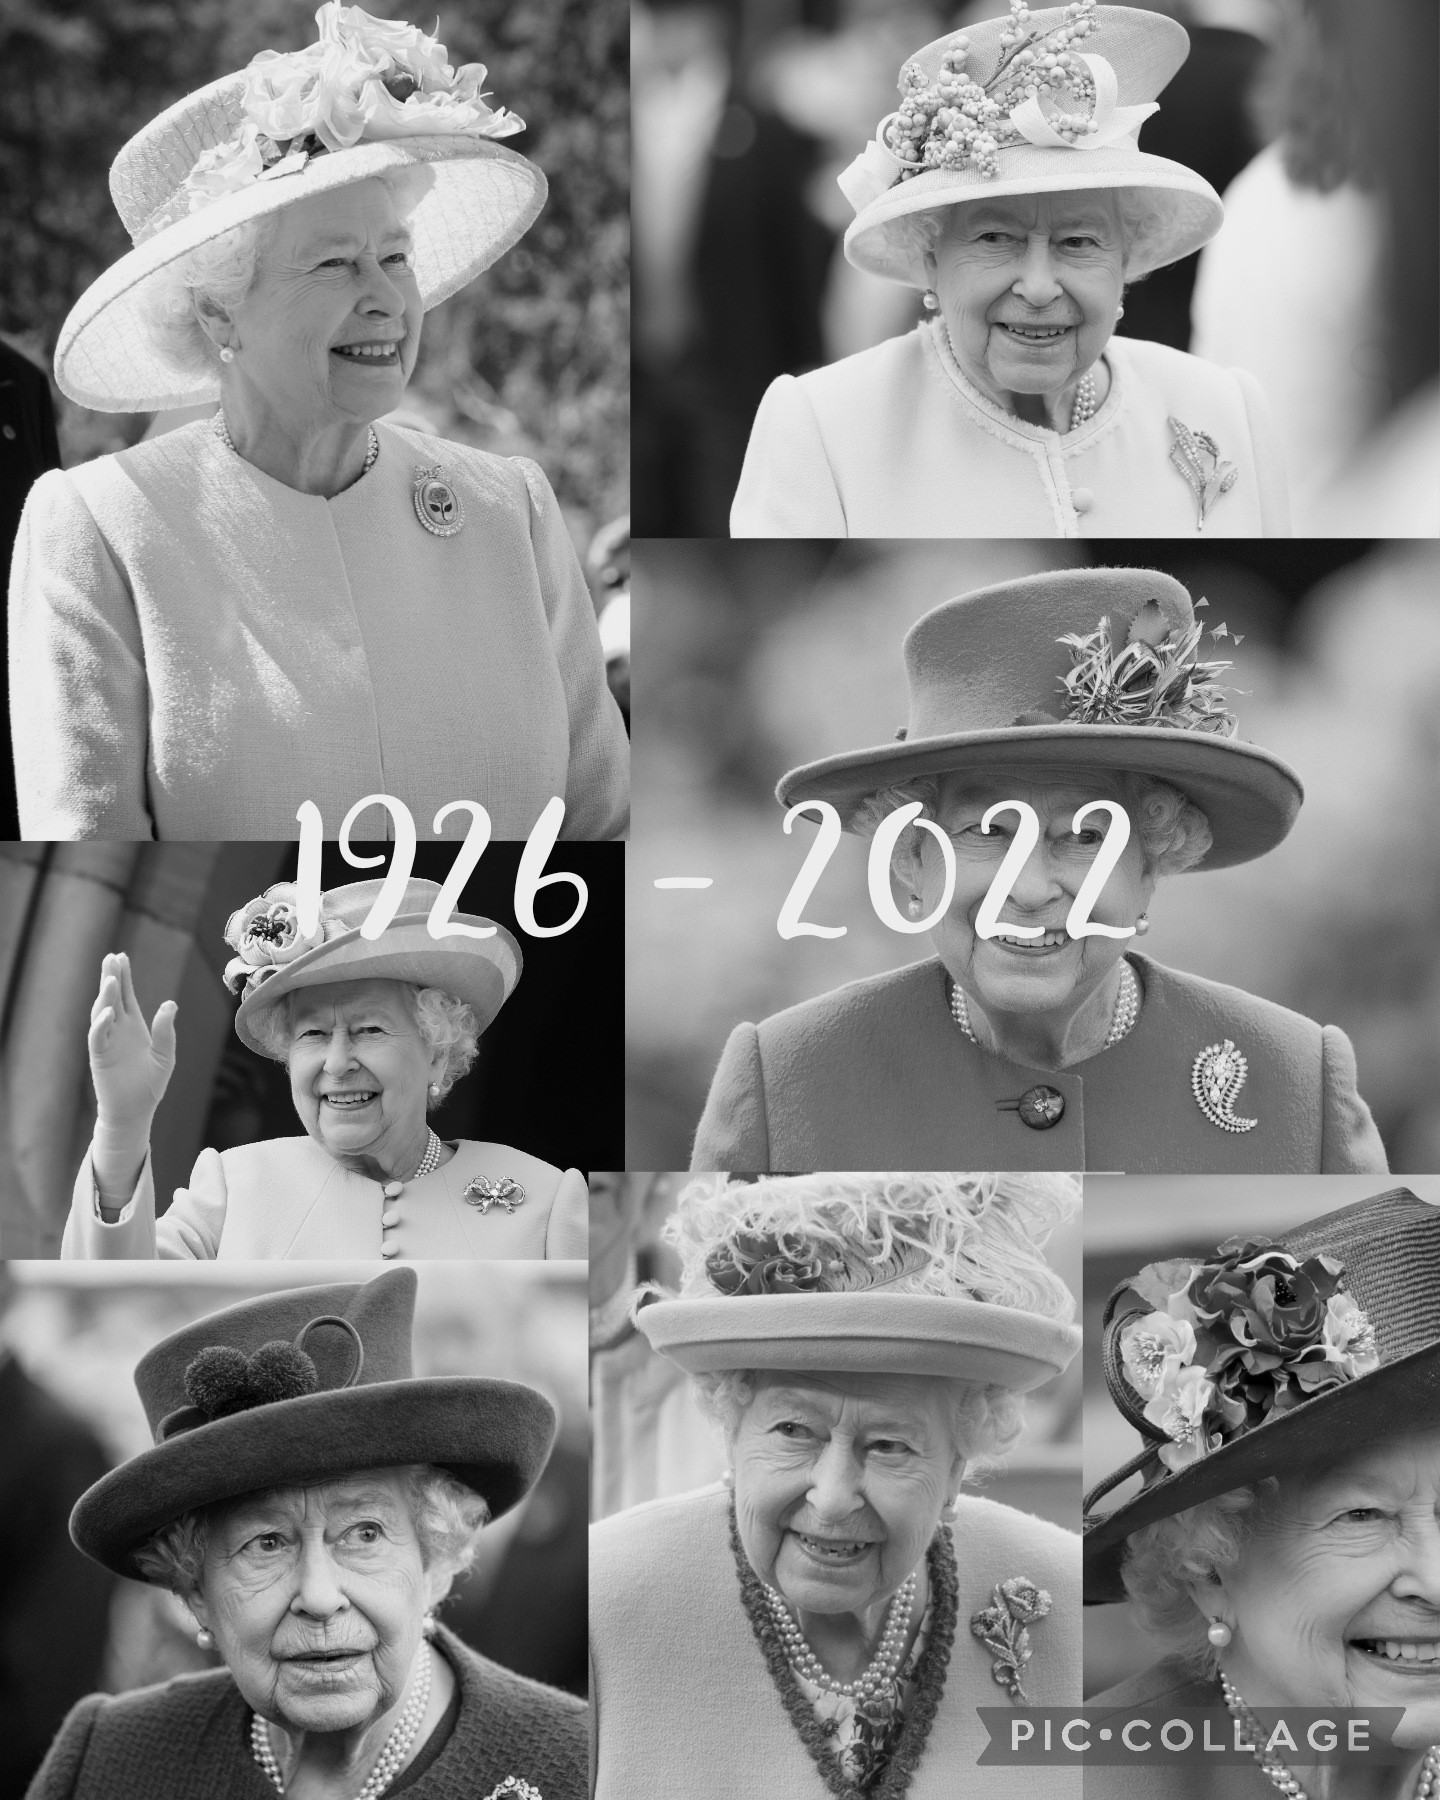 🕊Rest in peace Queen Elizabeth🕊
Thank you for a wonderful 70 years and you won't be forgotten ❤❤